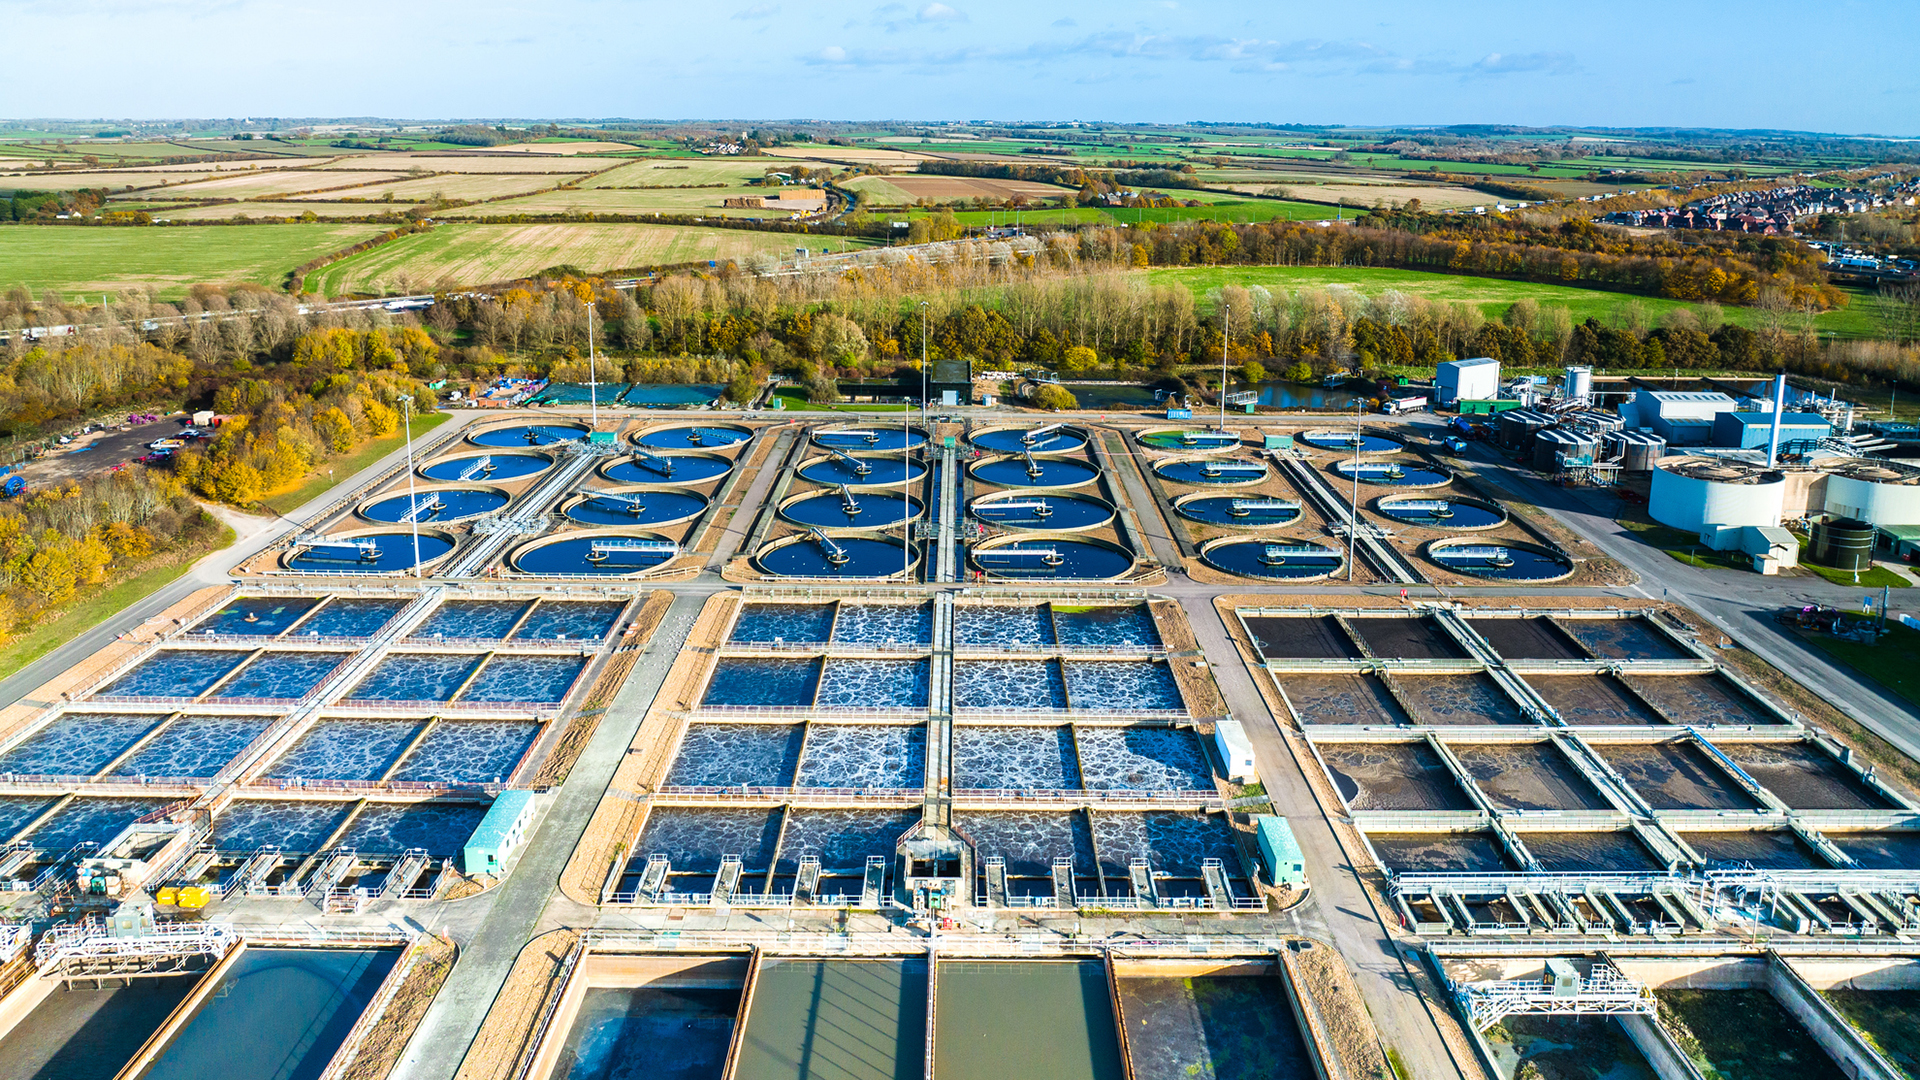 Reuse of wastewater treatments could be prevented by 'forever